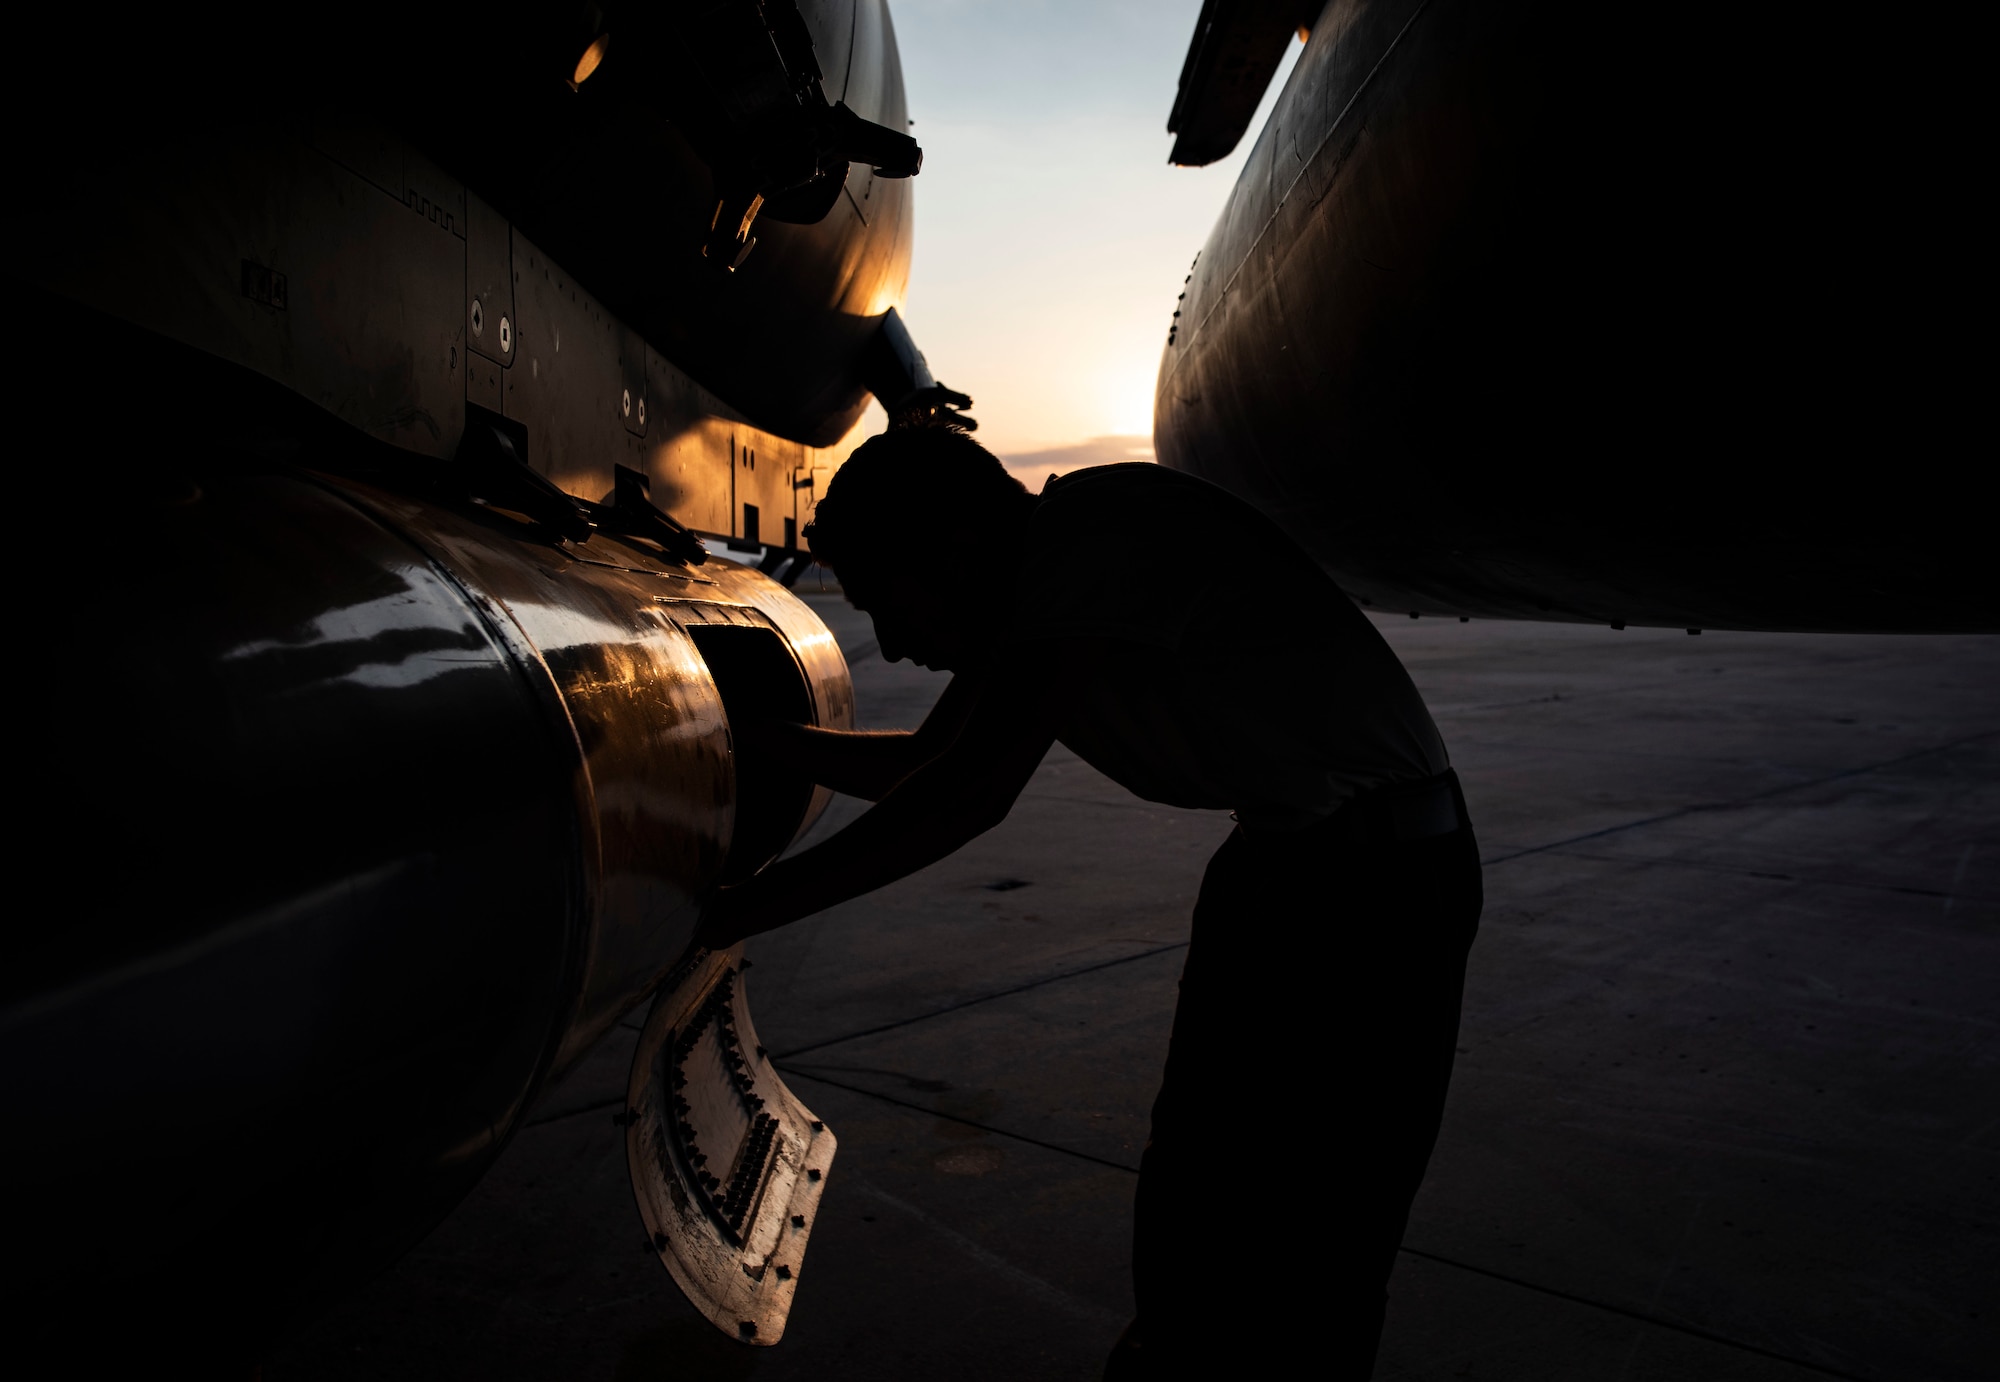 Airman 1st Class Bonifacio Garcia, 757th Aircraft Maintenance Squadron (AMXS) tactical aircraft maintainer, prepares an F-15E Strike Eagle fighter jet for its flight back to Nellis Air Force Base, Nev., at the conclusion of Combat Archer 19-12 on Tyndall AFB, Fla., Sept. 24, 2019. The 757th AMXS participated in Combat Archer to test new software on their aircraft and evaluate their performances. (U.S. Air Force photo by Airman 1st Class Bailee A. Darbasie)